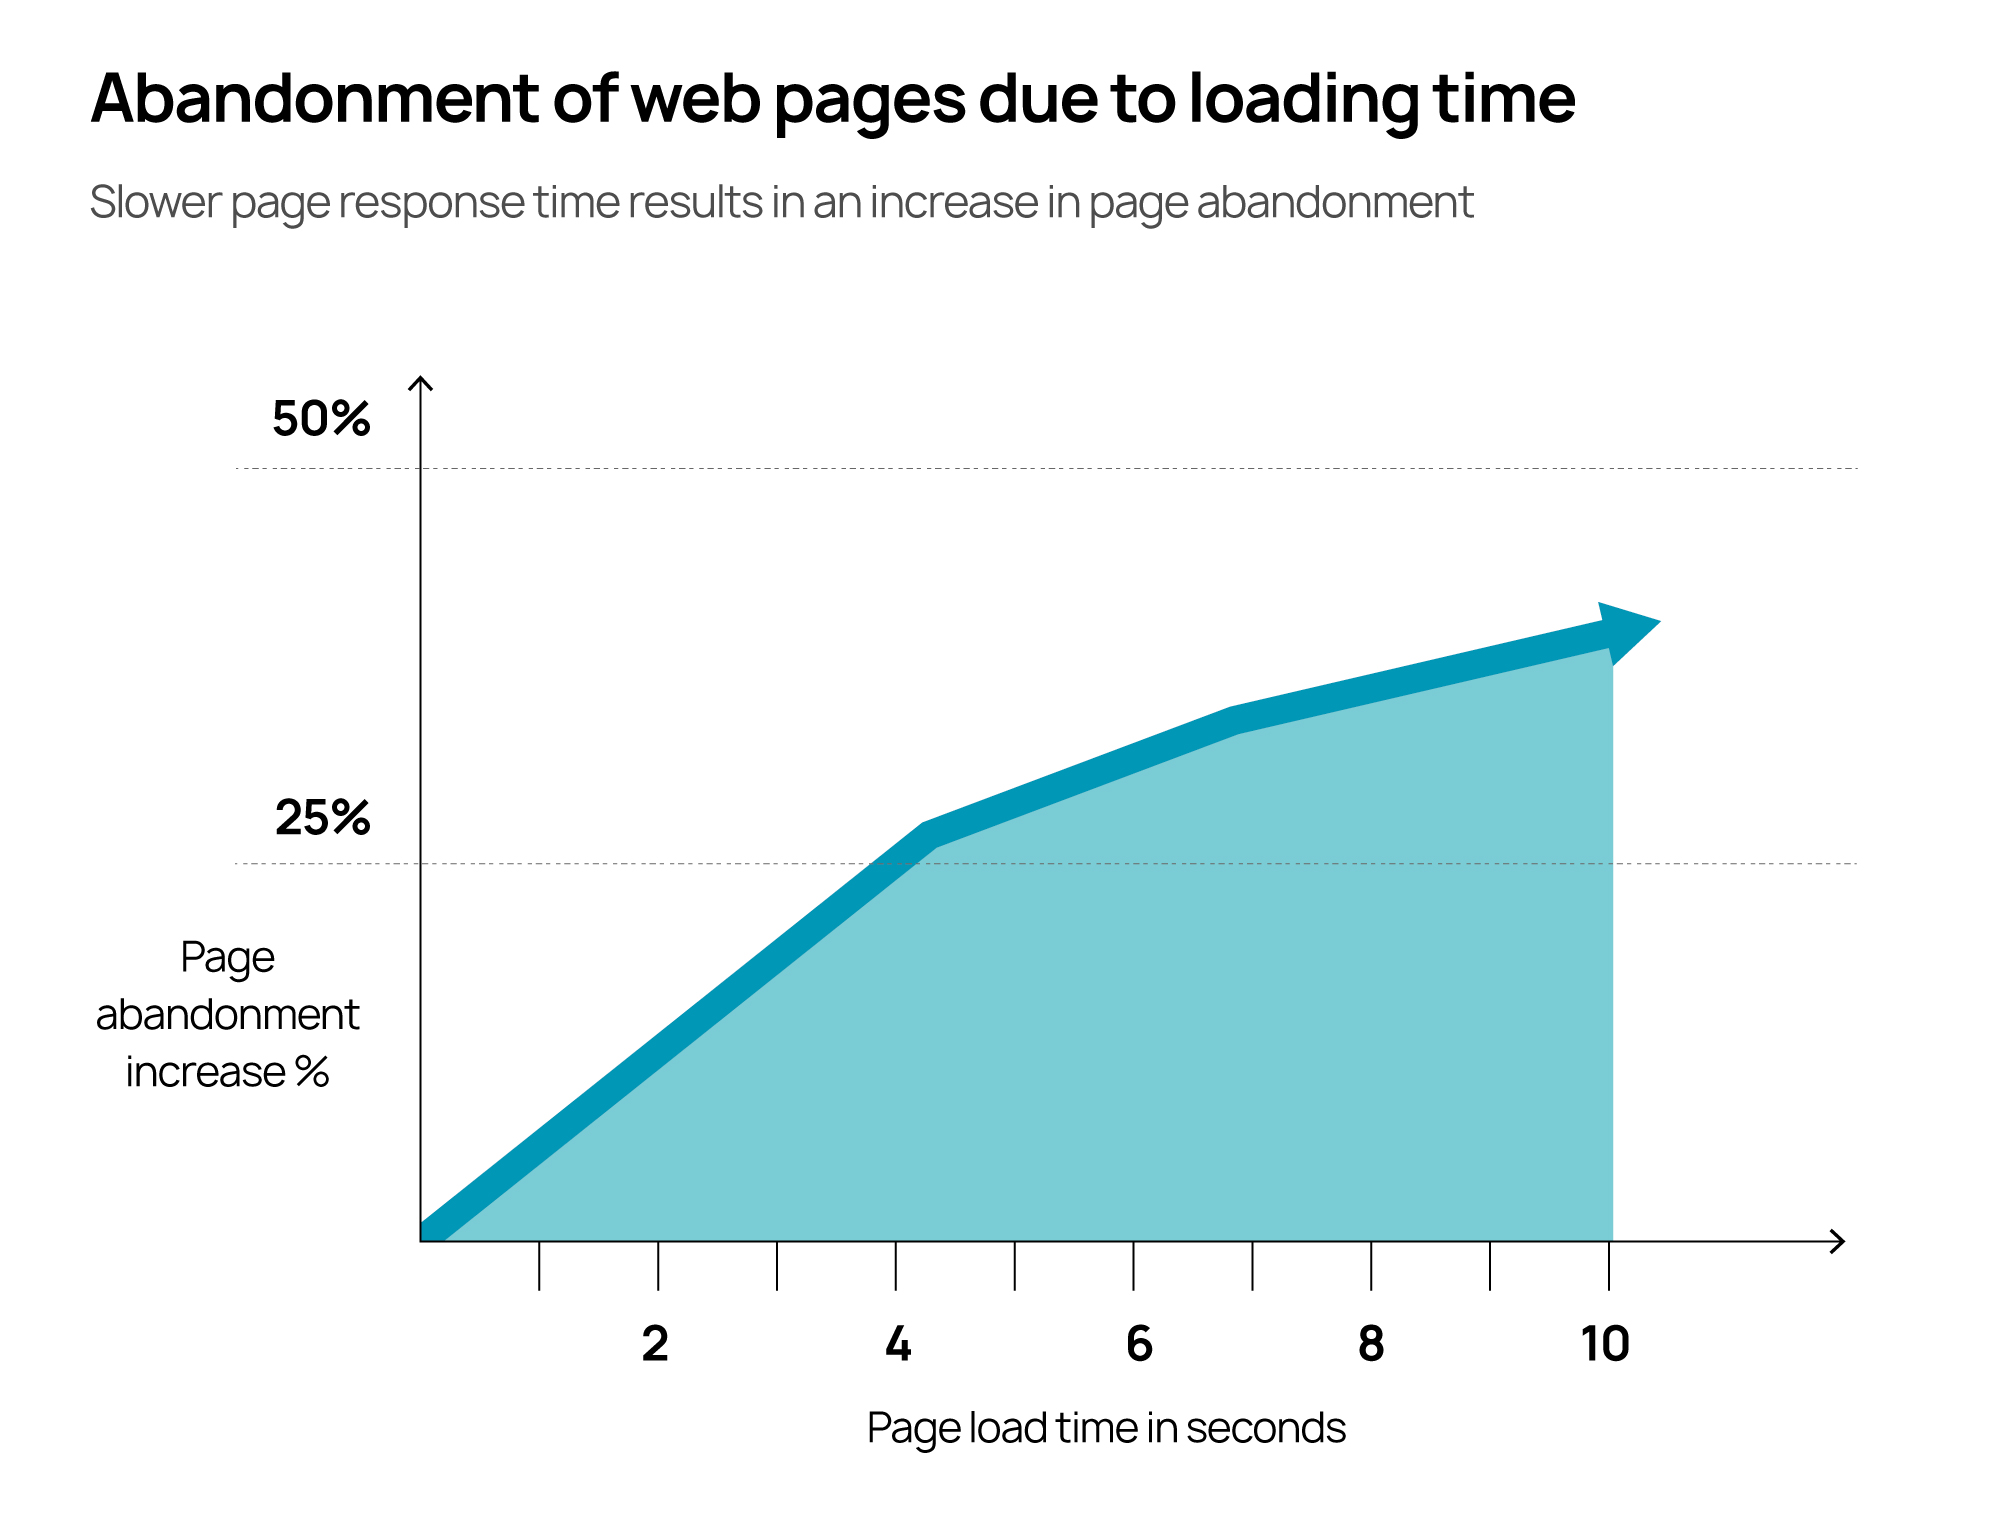 A graph titled "Abandonment of web pages due to loading time" shows slower page response time resulting in an increase in page abandonment. After 5 seconds of loading time, page abandonment exceeds 25%. After 10 seconds of loading time, page abandonment increases to roughly 40%.